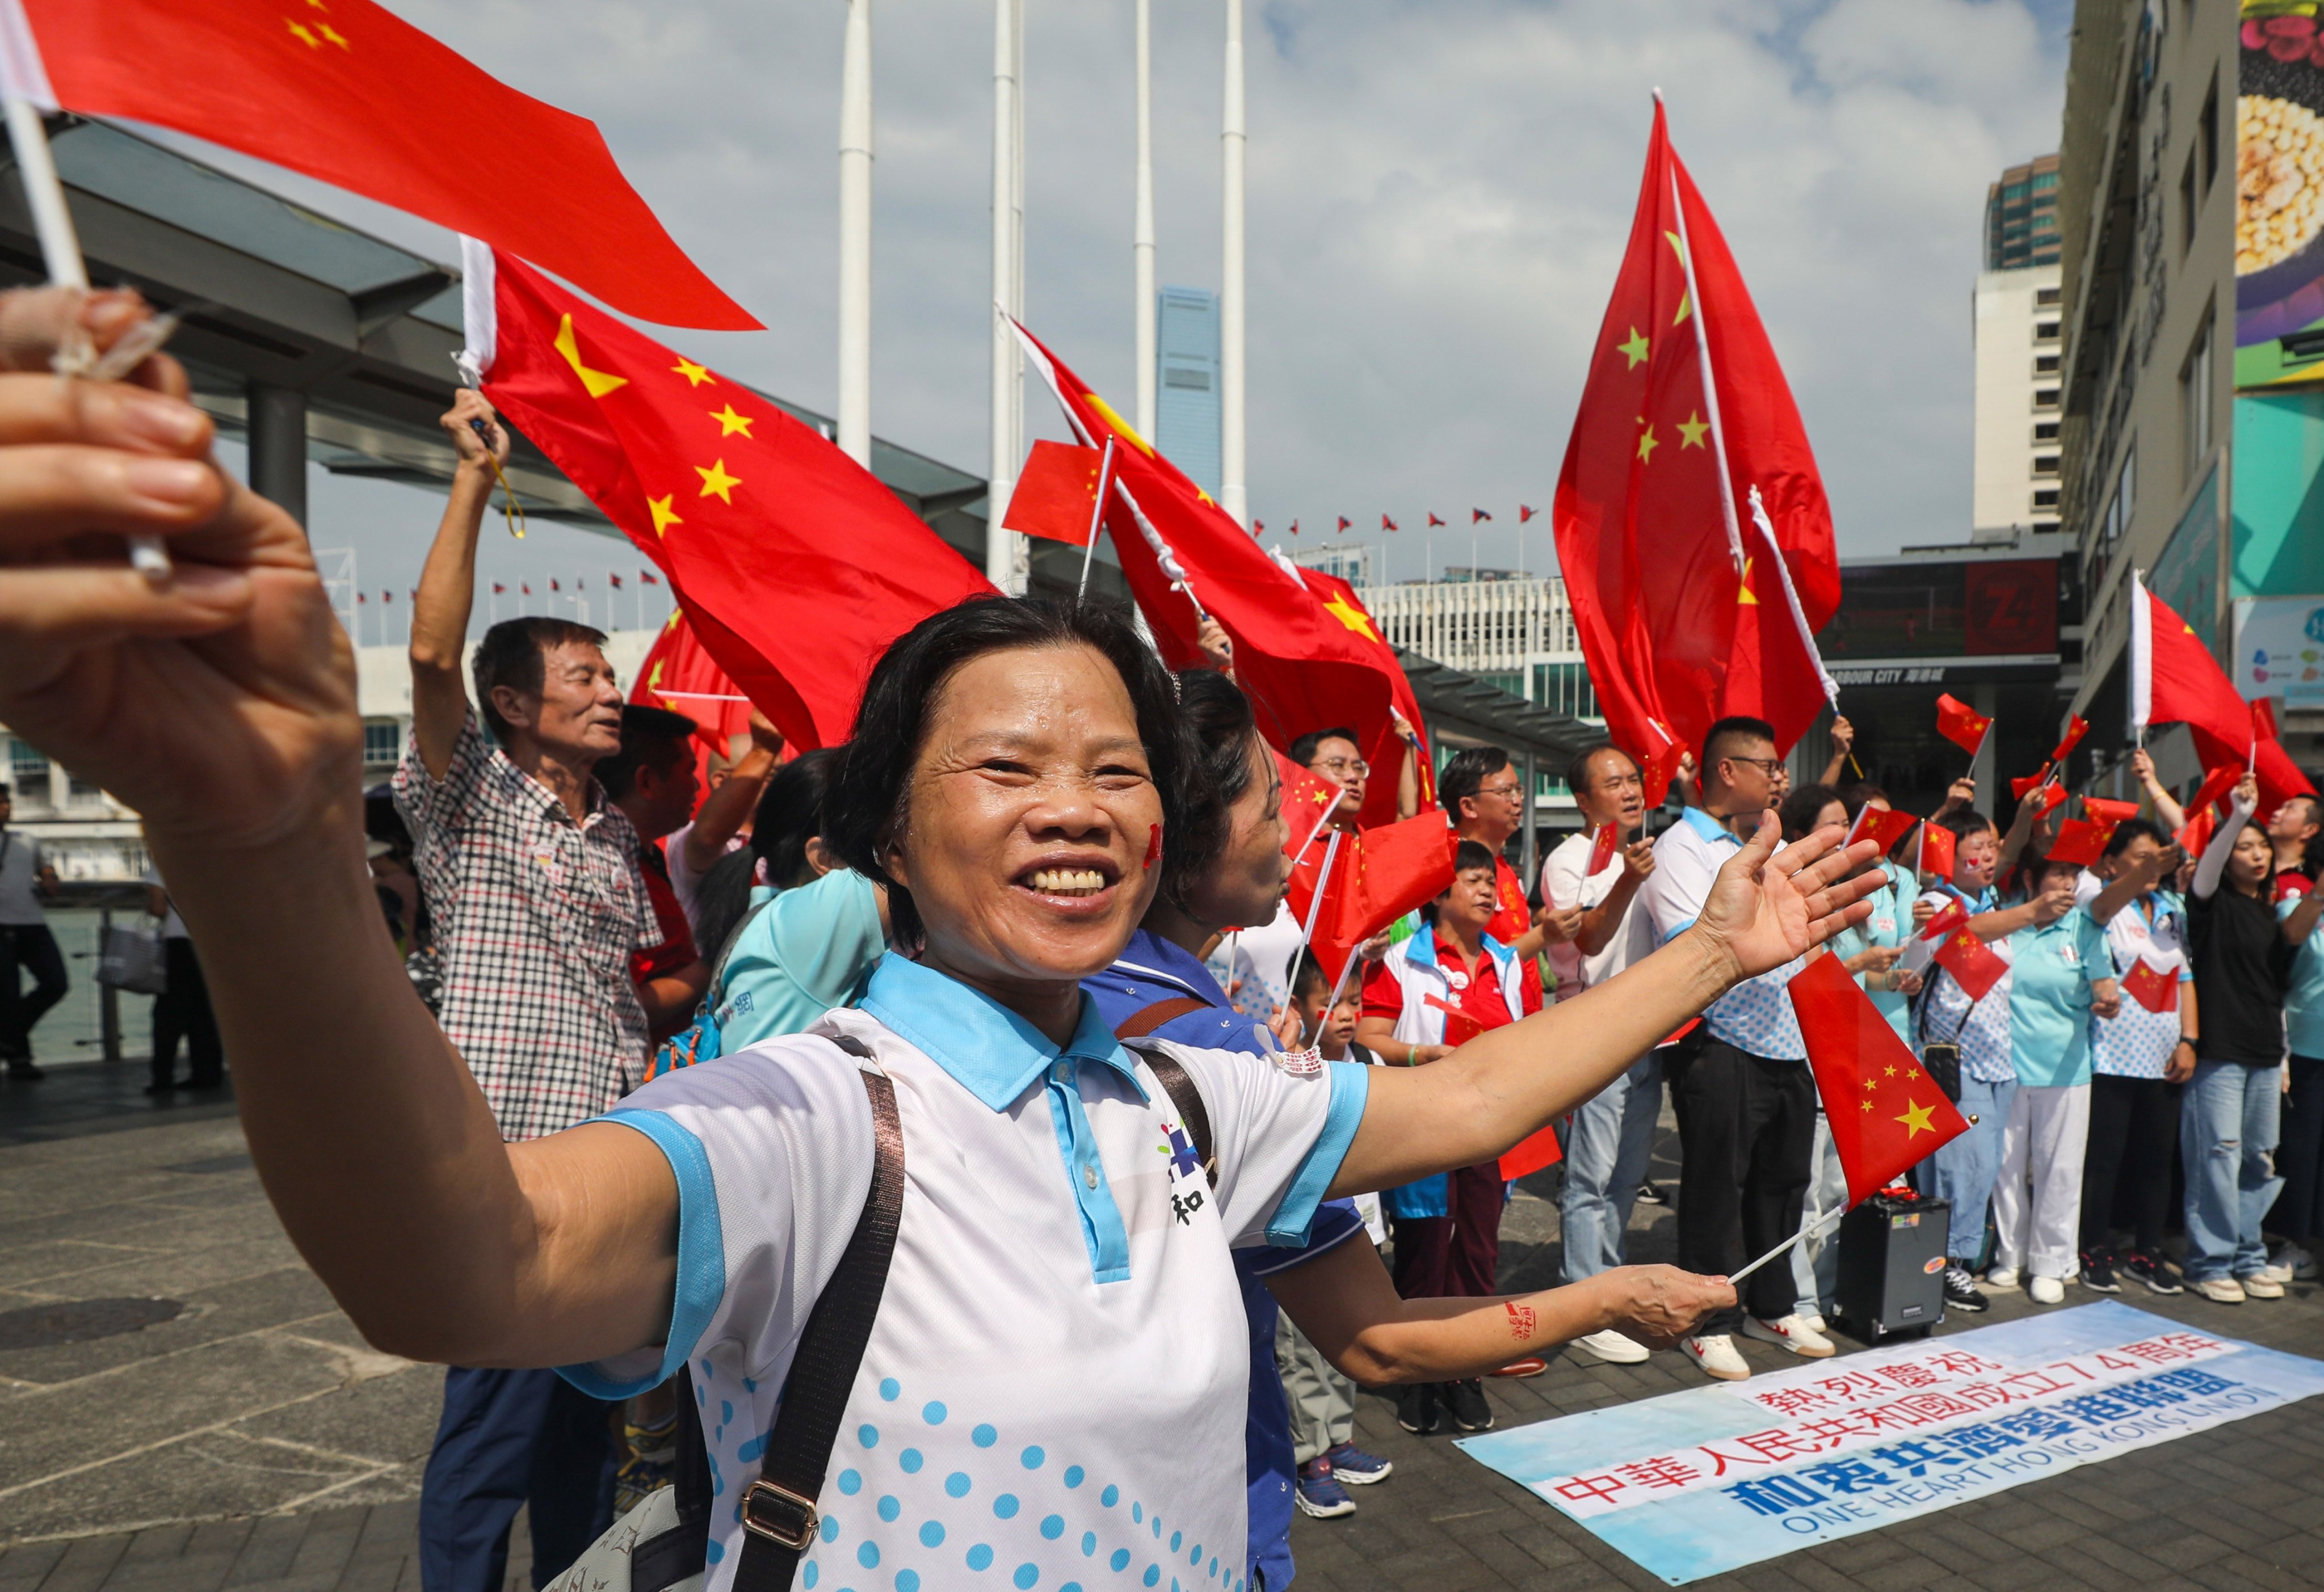 People wave Chinese flags in Tsim Sha Tsui on National Day last year. The Social Welfare Department has not revealed the weighting of new criteria for in a scoring system for funding allocation. Photo: Xiaomei Chen